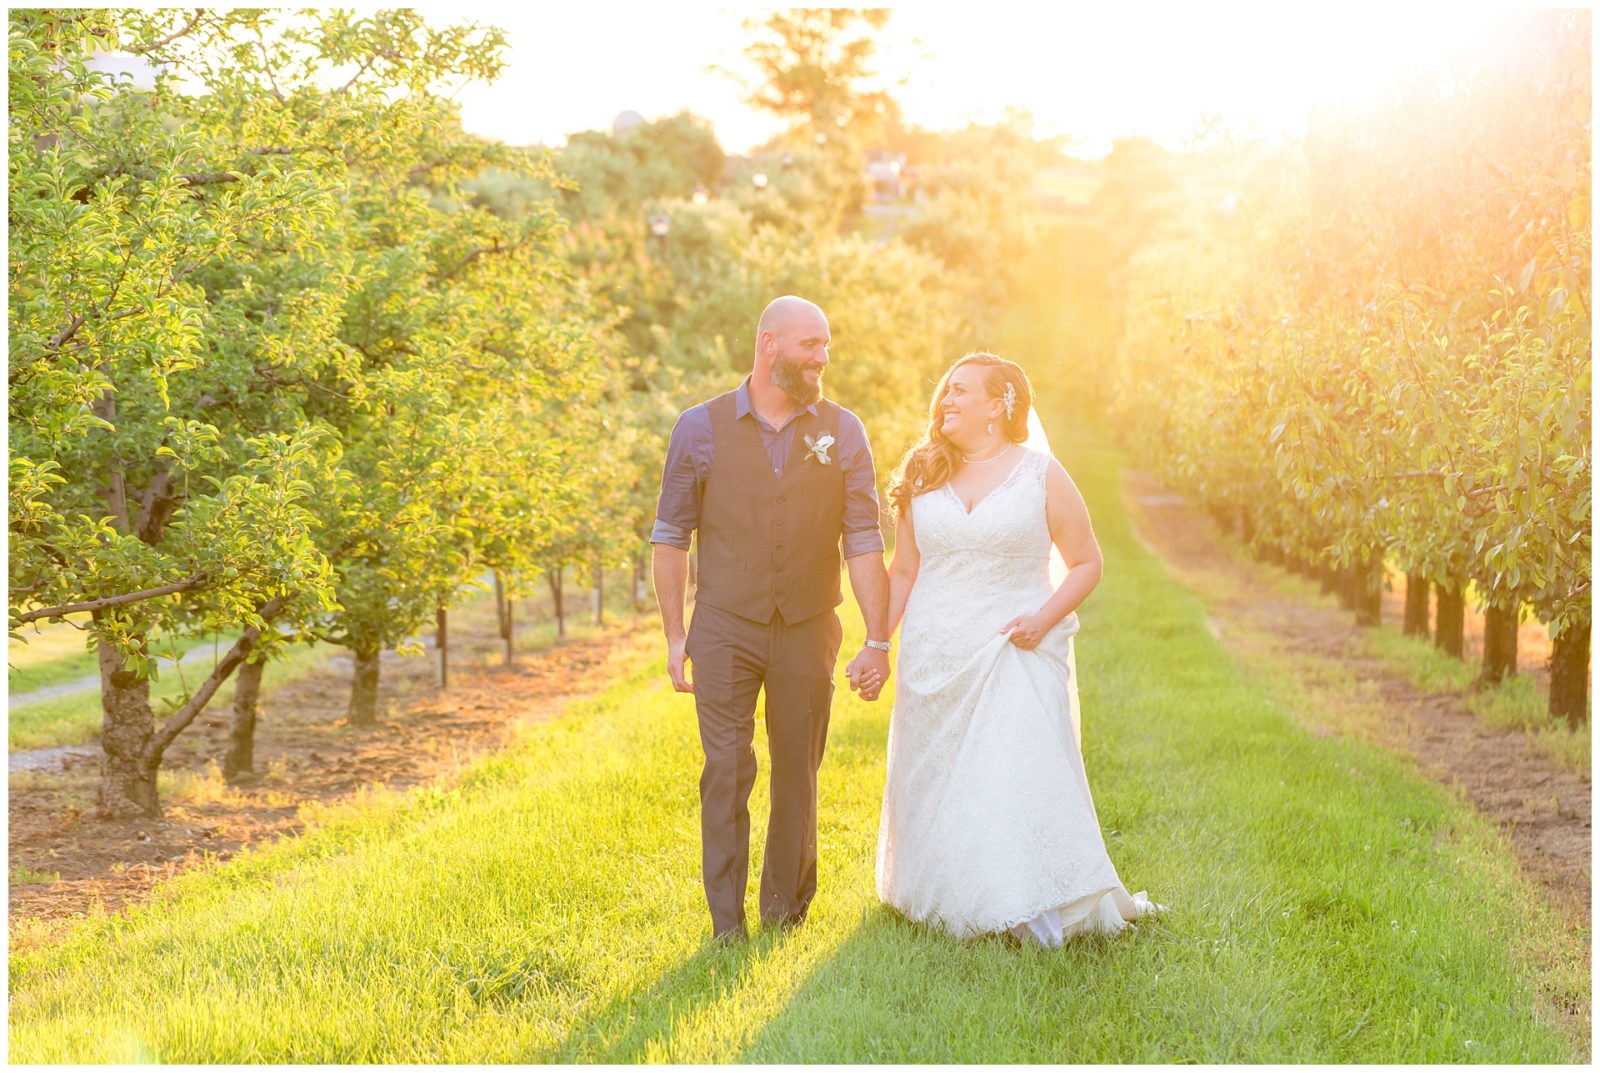 Sunset bride and groom wedding photos at Evans Orchard in Georgetown, Kentucky